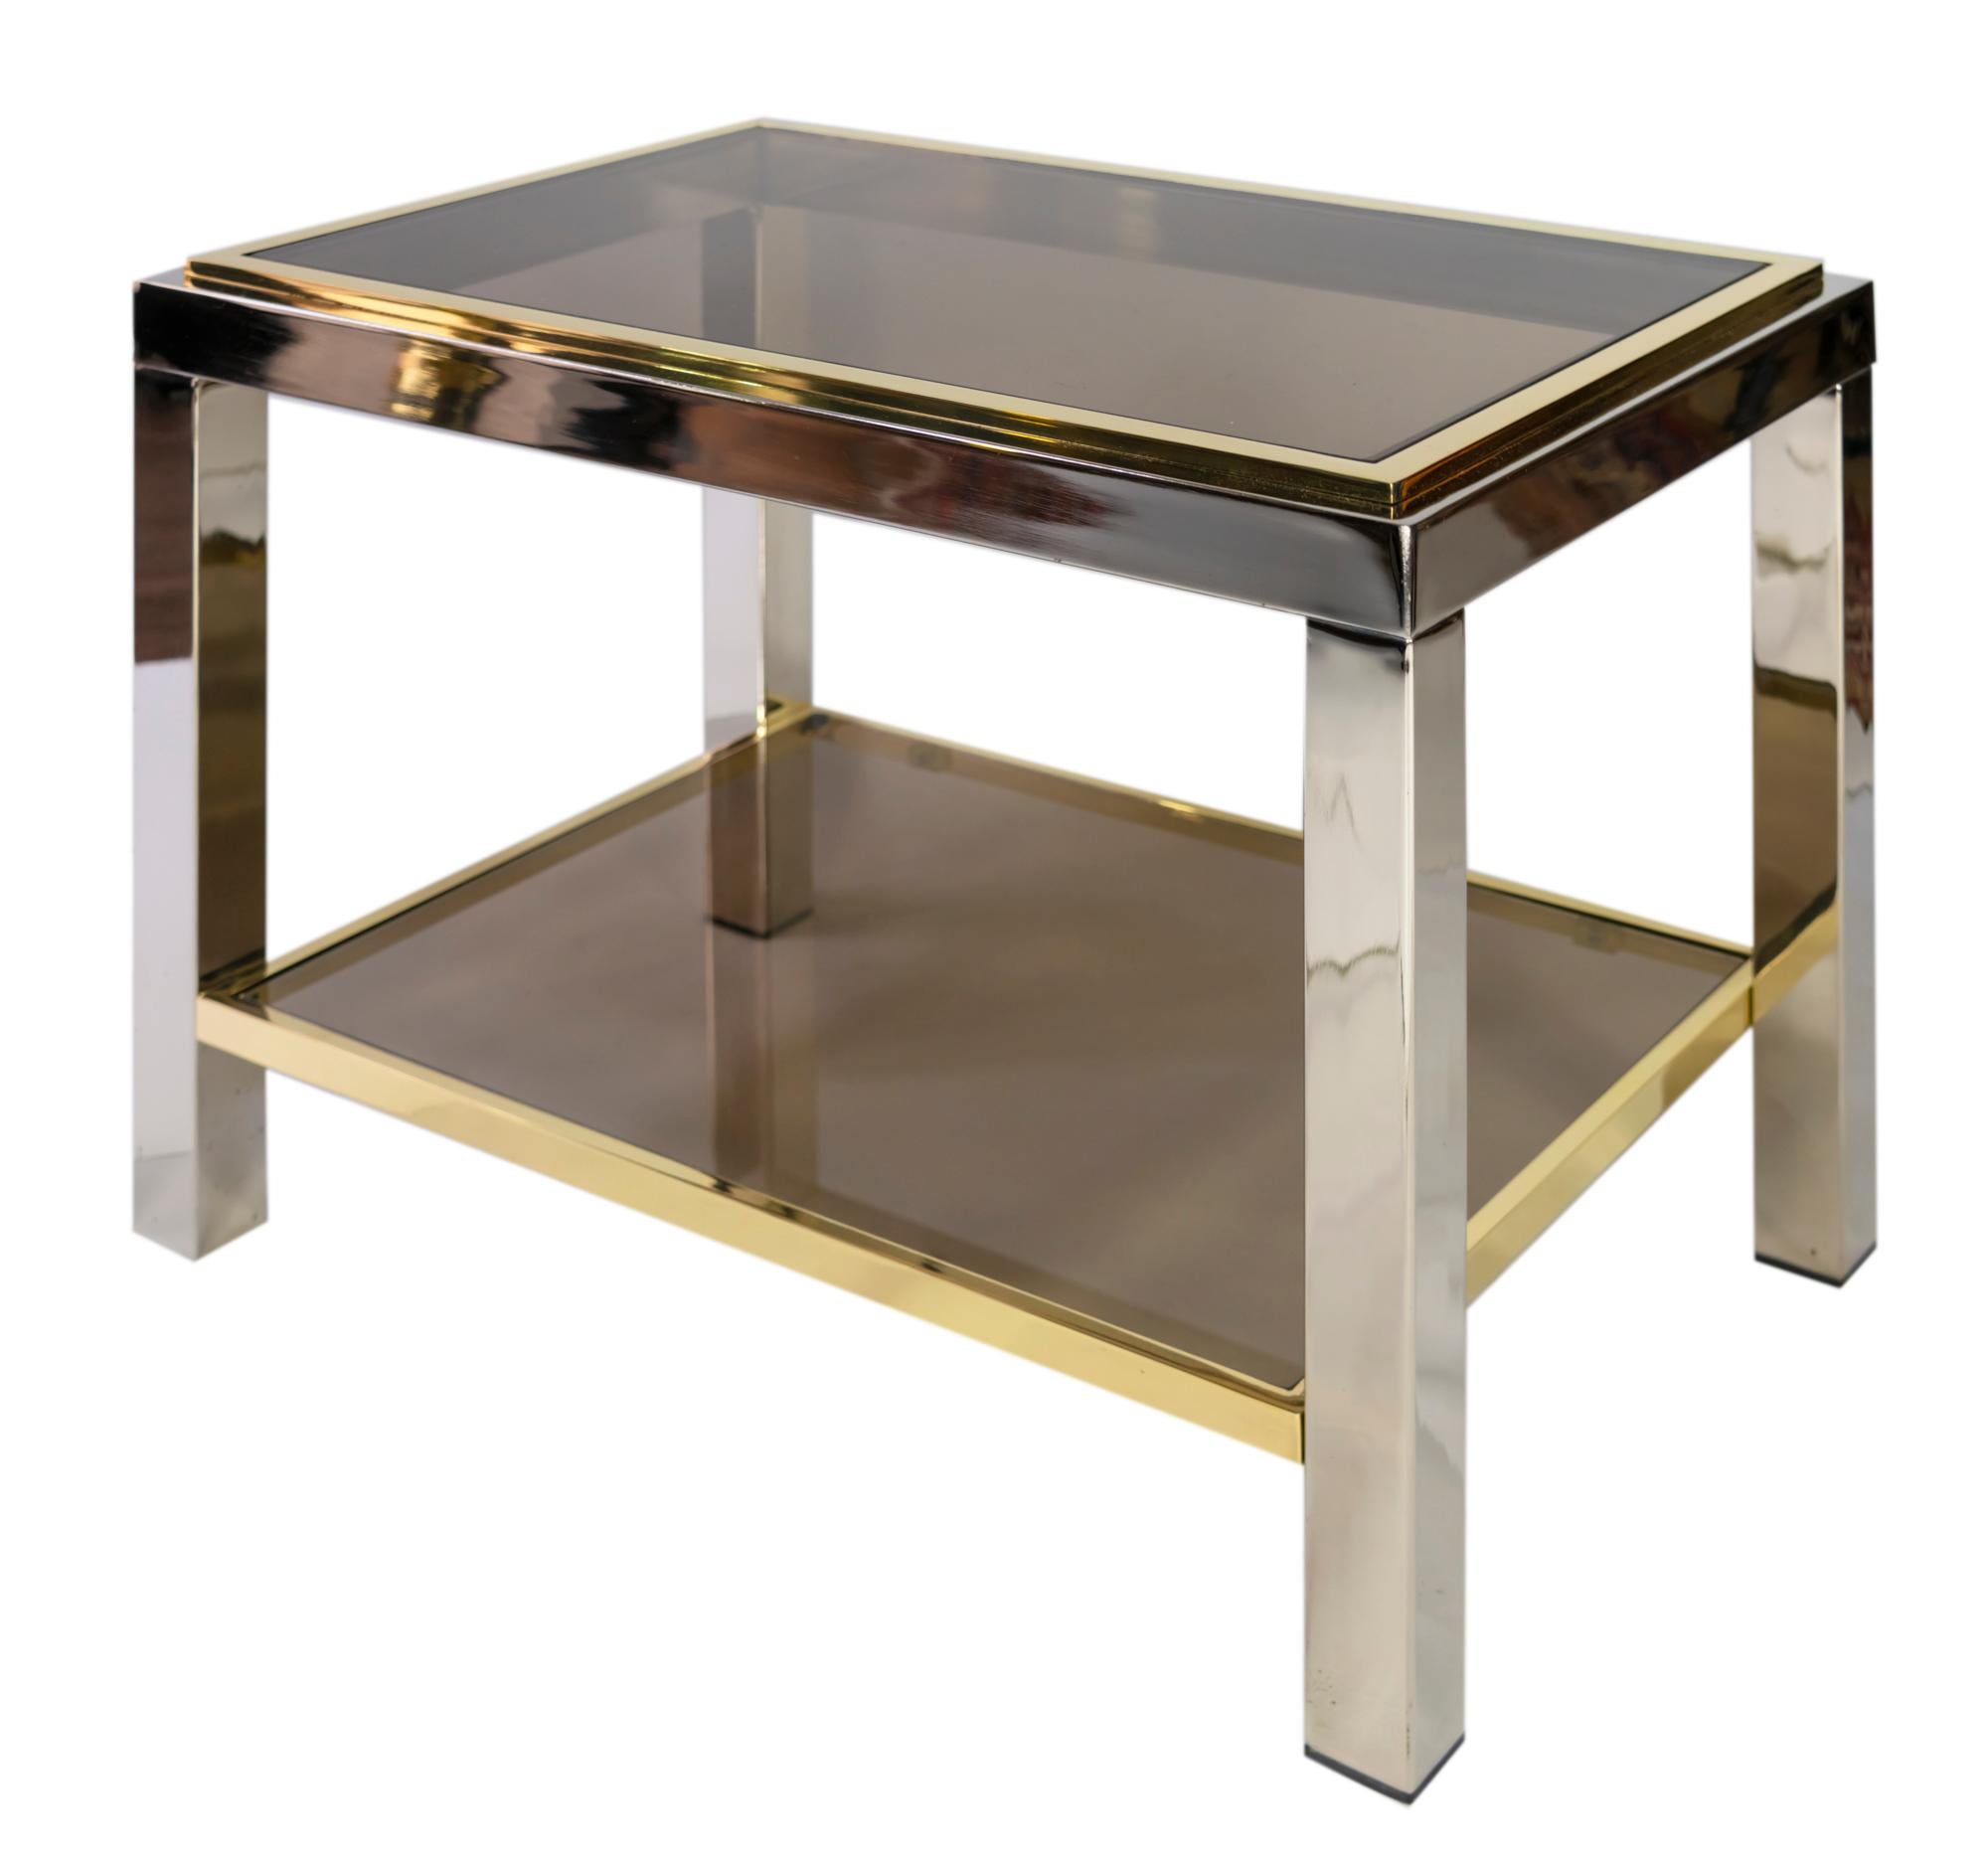 Italian Pair of Mid-Century Brass, Chrome and Glass Top Side Tables by Willy Rizzo